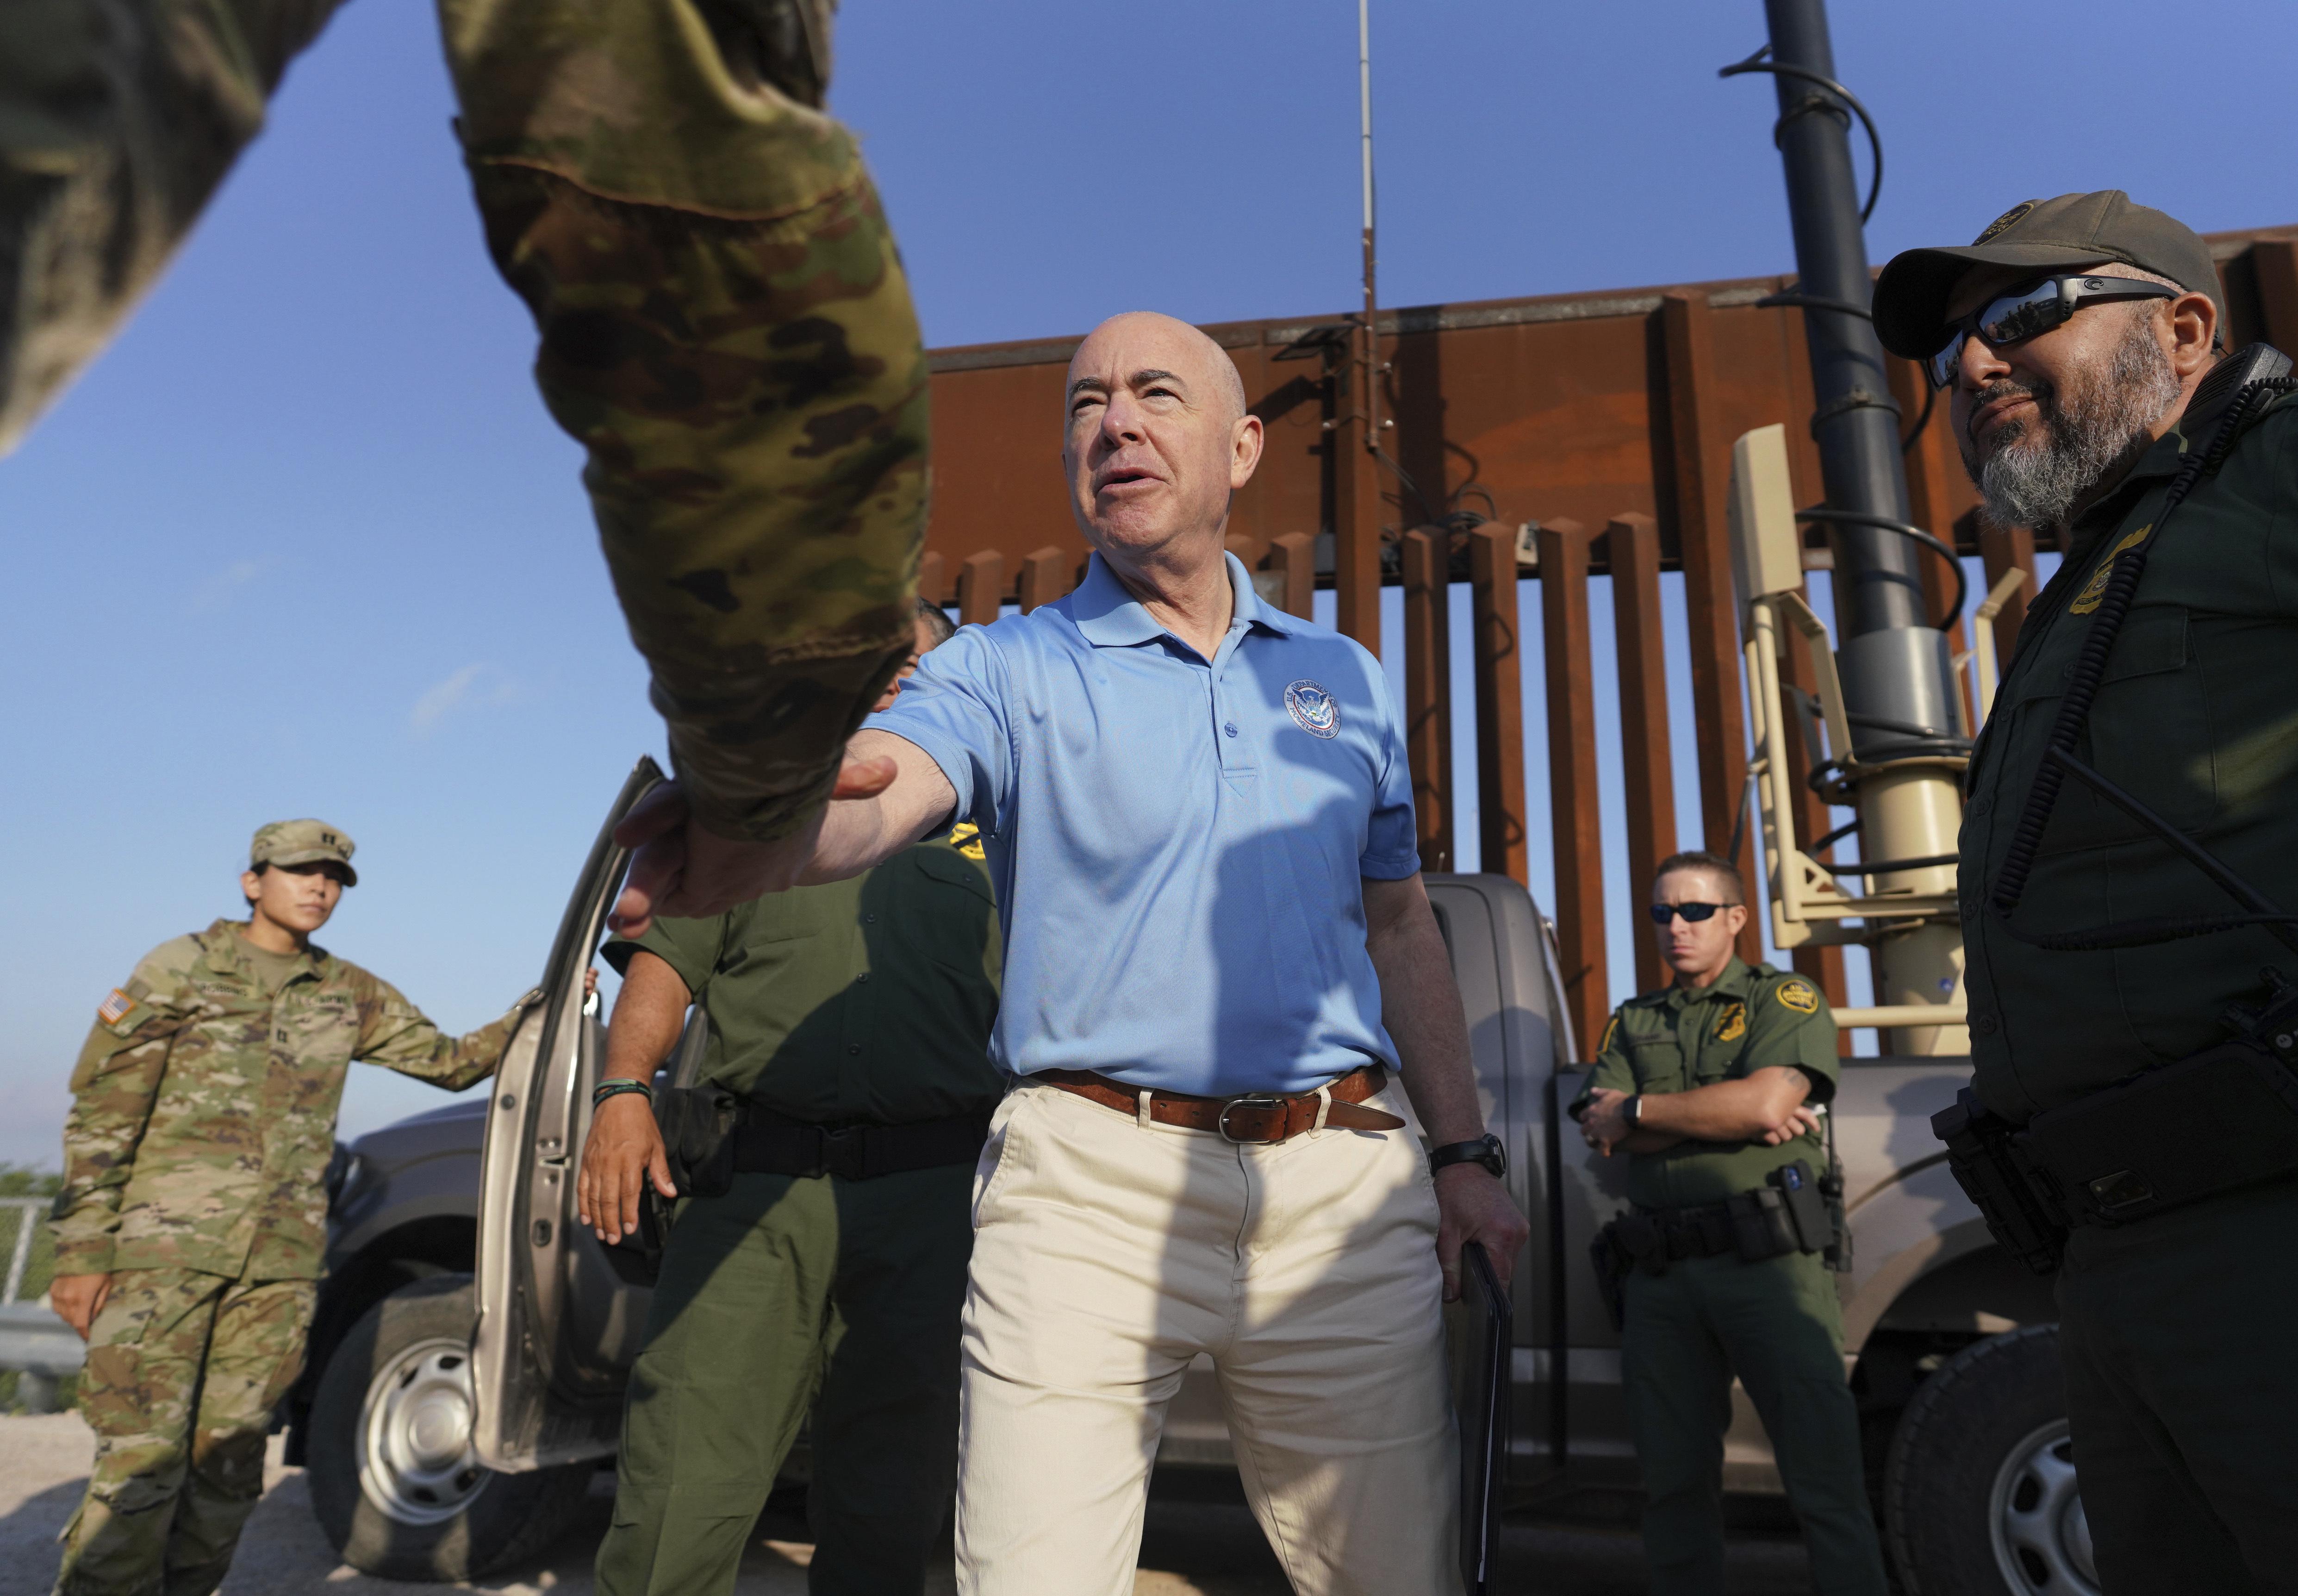 Biden admin acknowledges 'acute and immediate need' for border wall